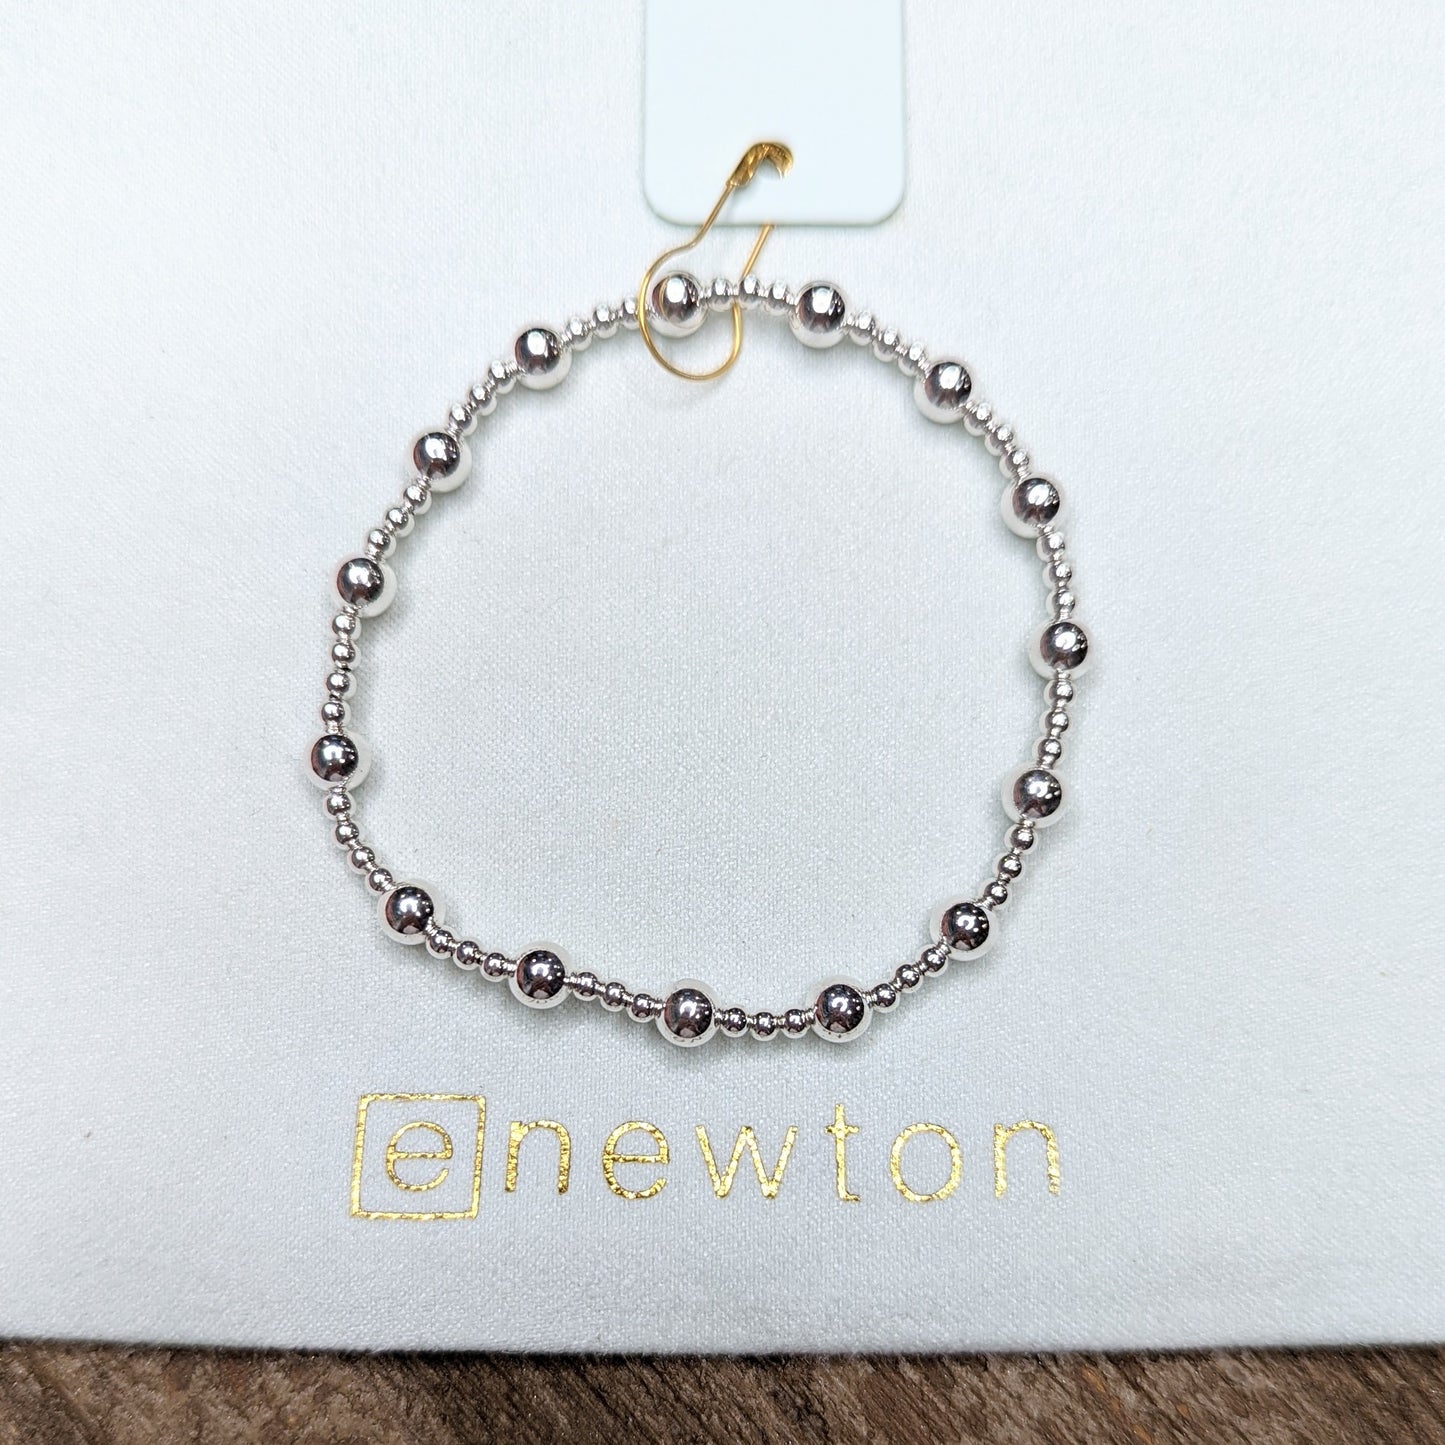 Classic sterling silver 5mm Sincerity bracelet by eNewton. Shop at The Painted Cottage in Edgewater, MD.